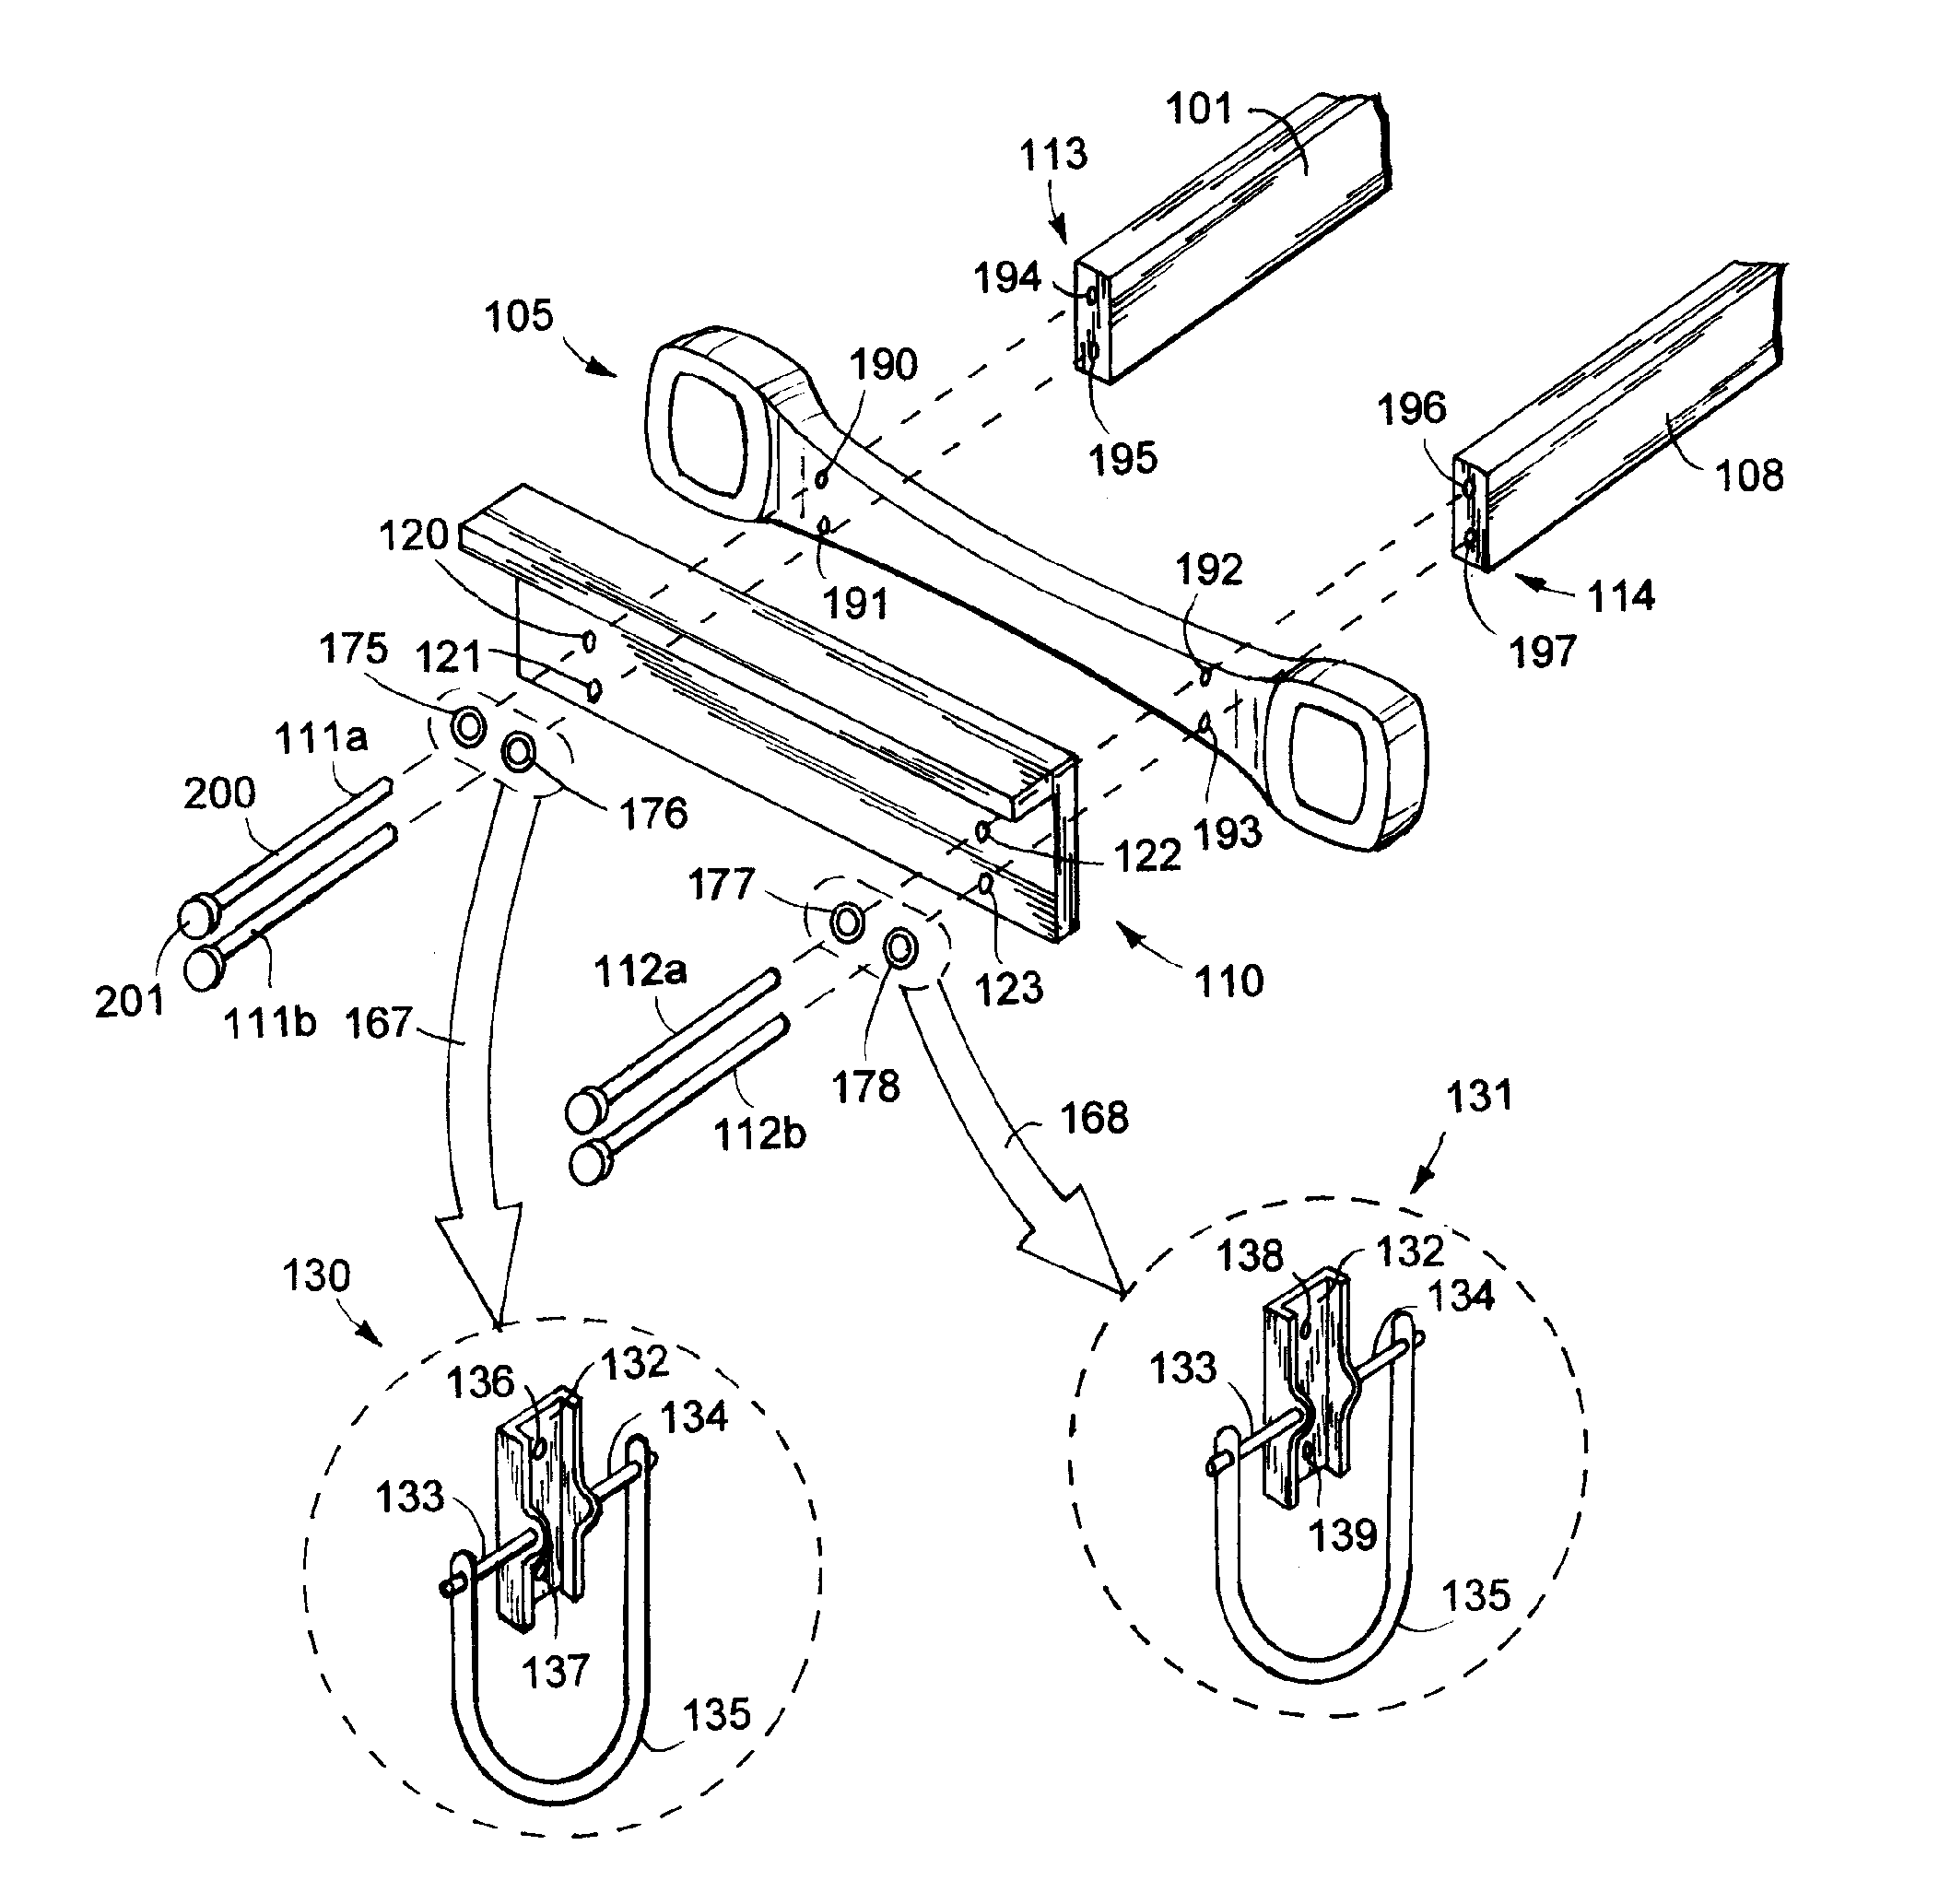 Support structure for a spare tire carrier assembly